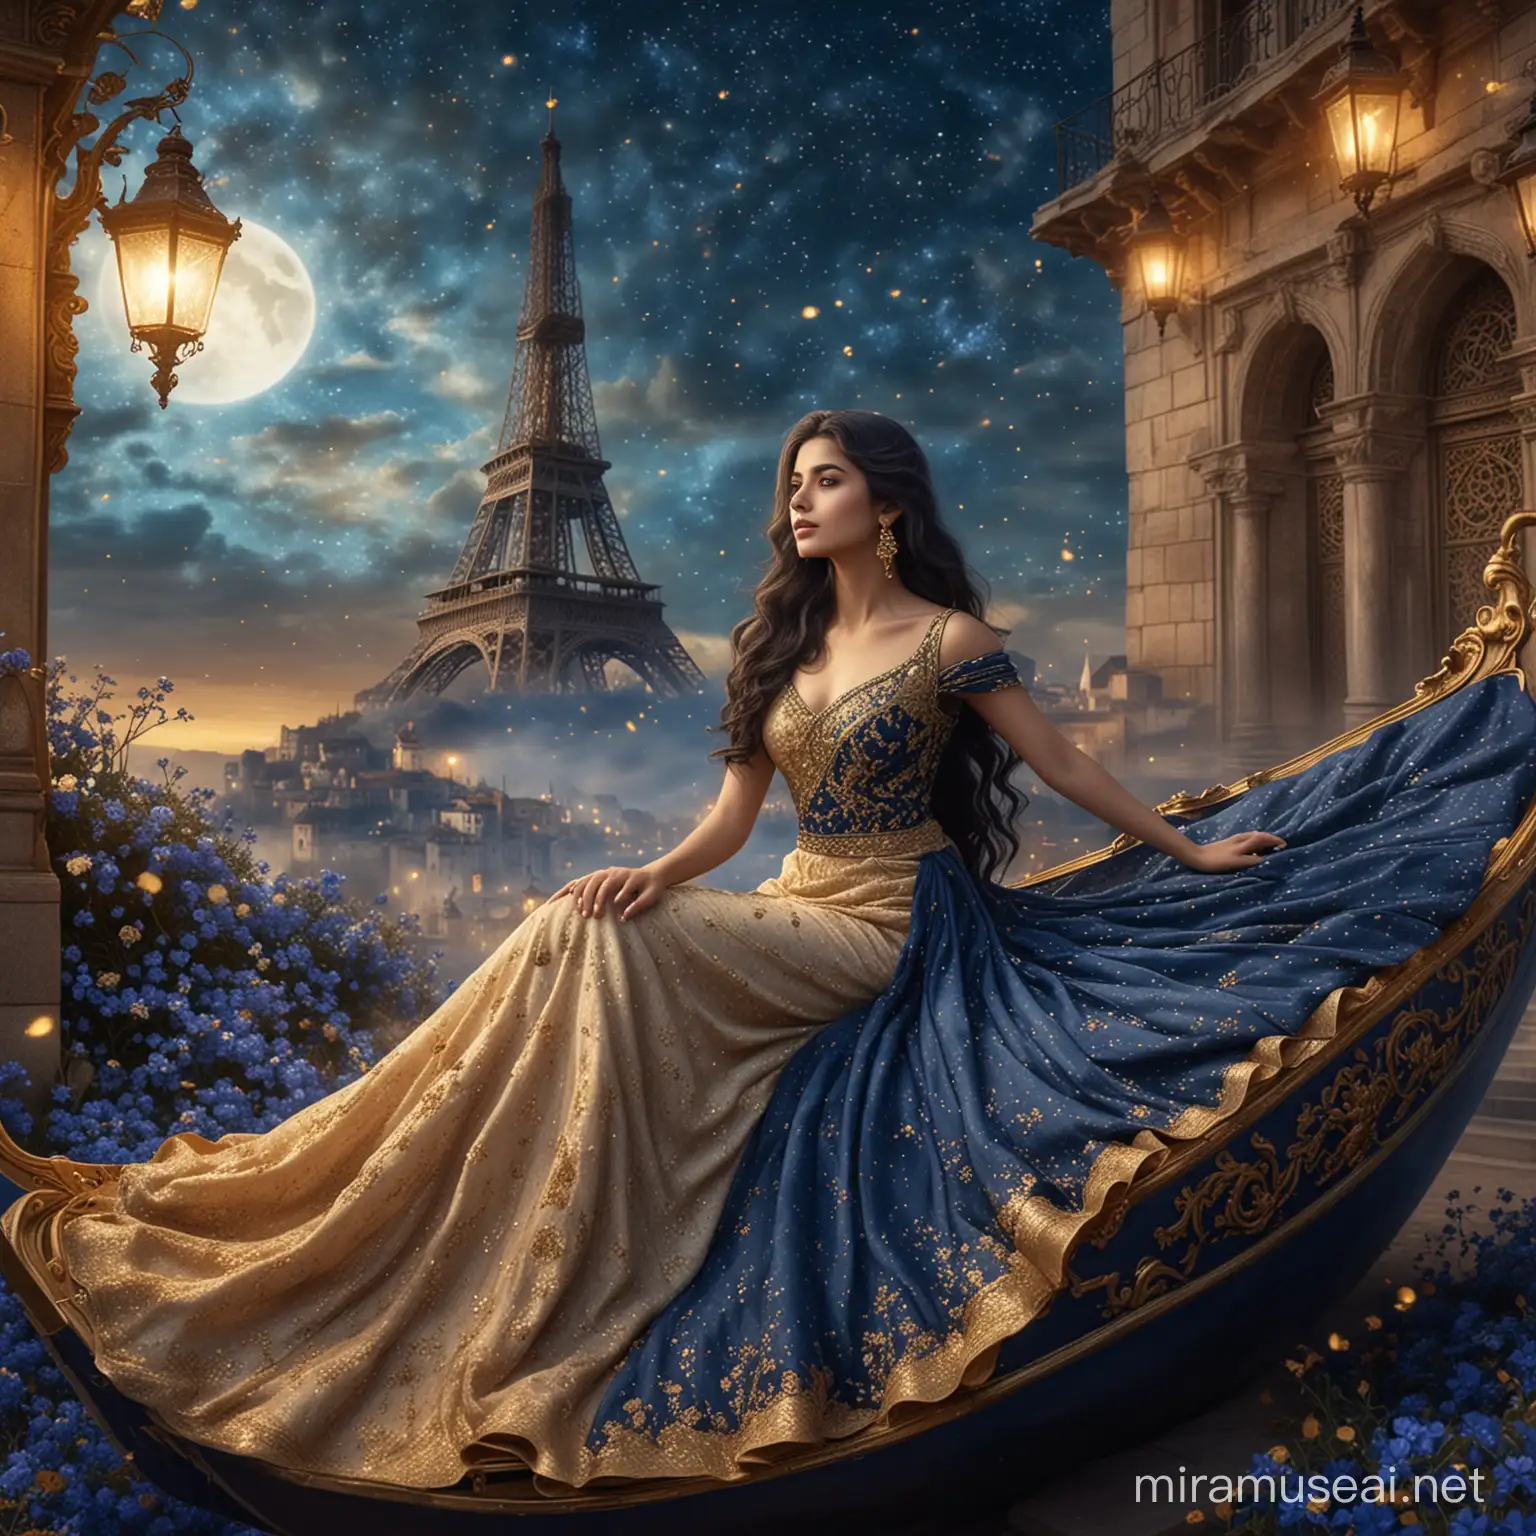 A beautiful woman, sitting on a floral boat,surrounded by small dark blue flowers and golden dust. Long wavy black hair. Elegant long beige and dark blue dress, haute couture, sari tissu. Background nebula sky with golden light. background golden dust and old lamps. Background tower effel. 8k, fantasy, illustration, digital art, illustration art, fantasy art, fantasy styl


